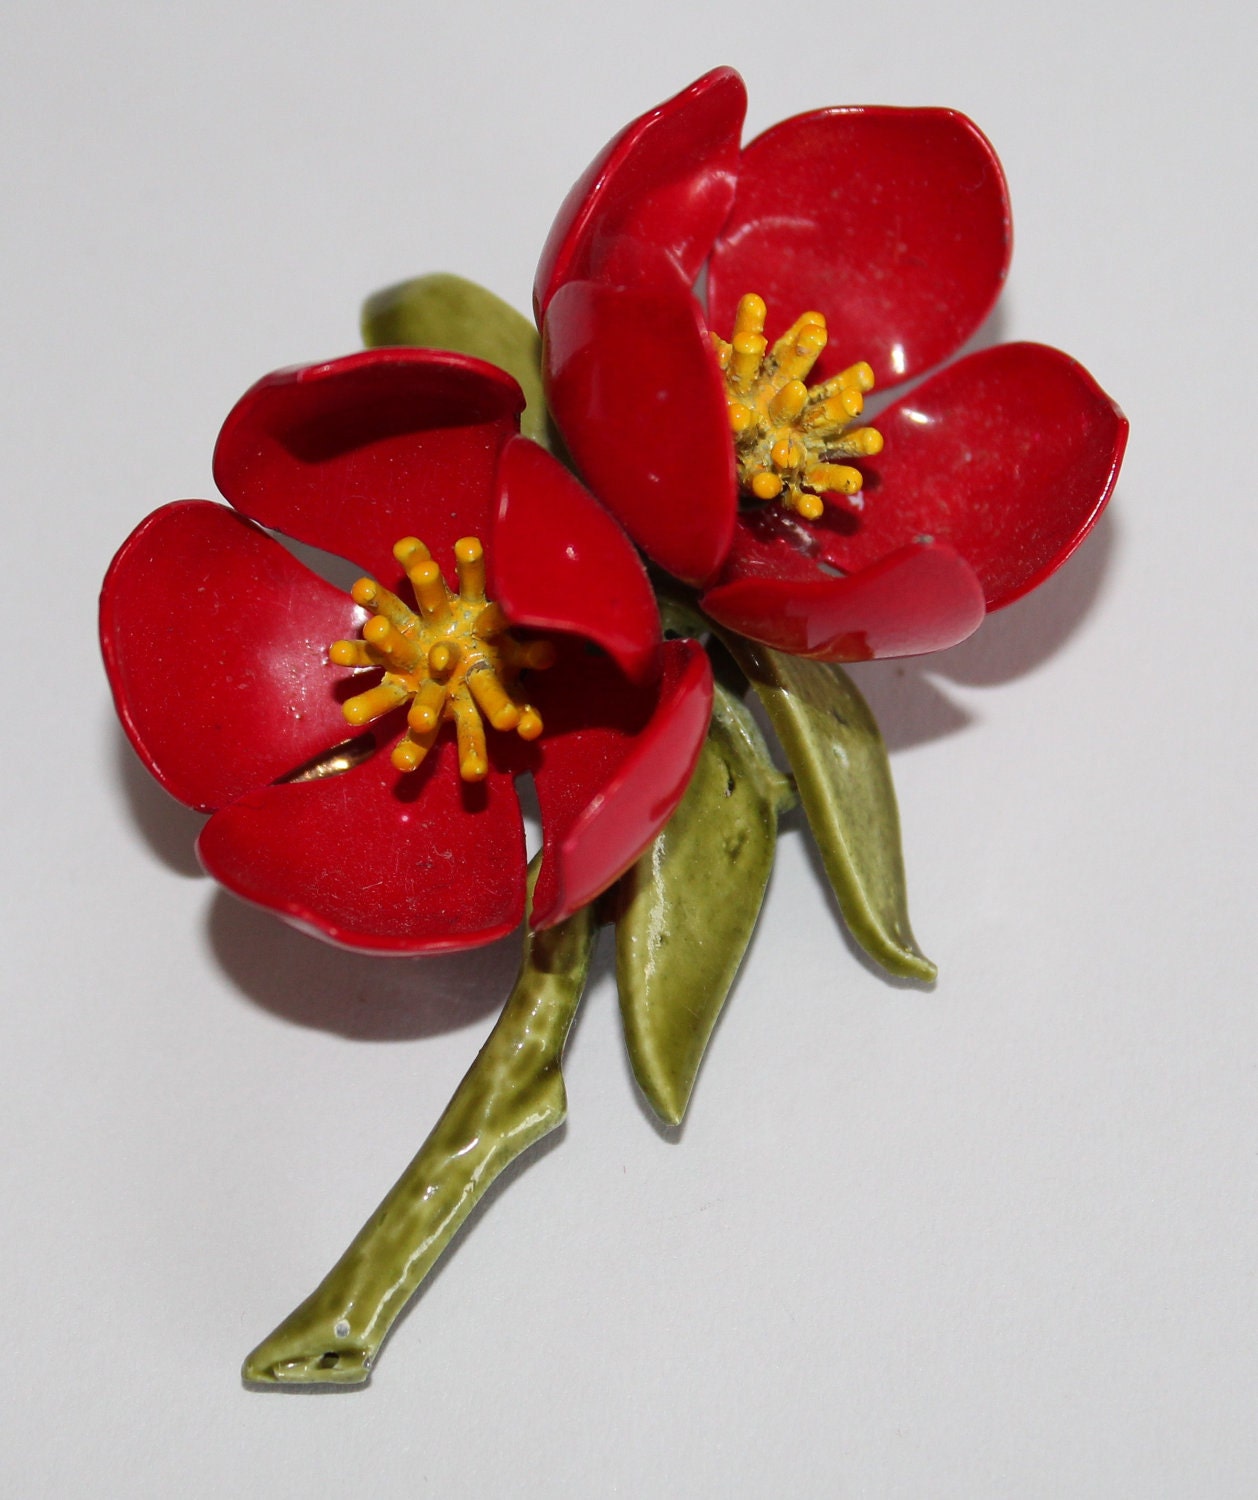 Vintage Jewelry Brooch  enamel floral red, yellow green on realistic stem, mid century - purrfectstitchers